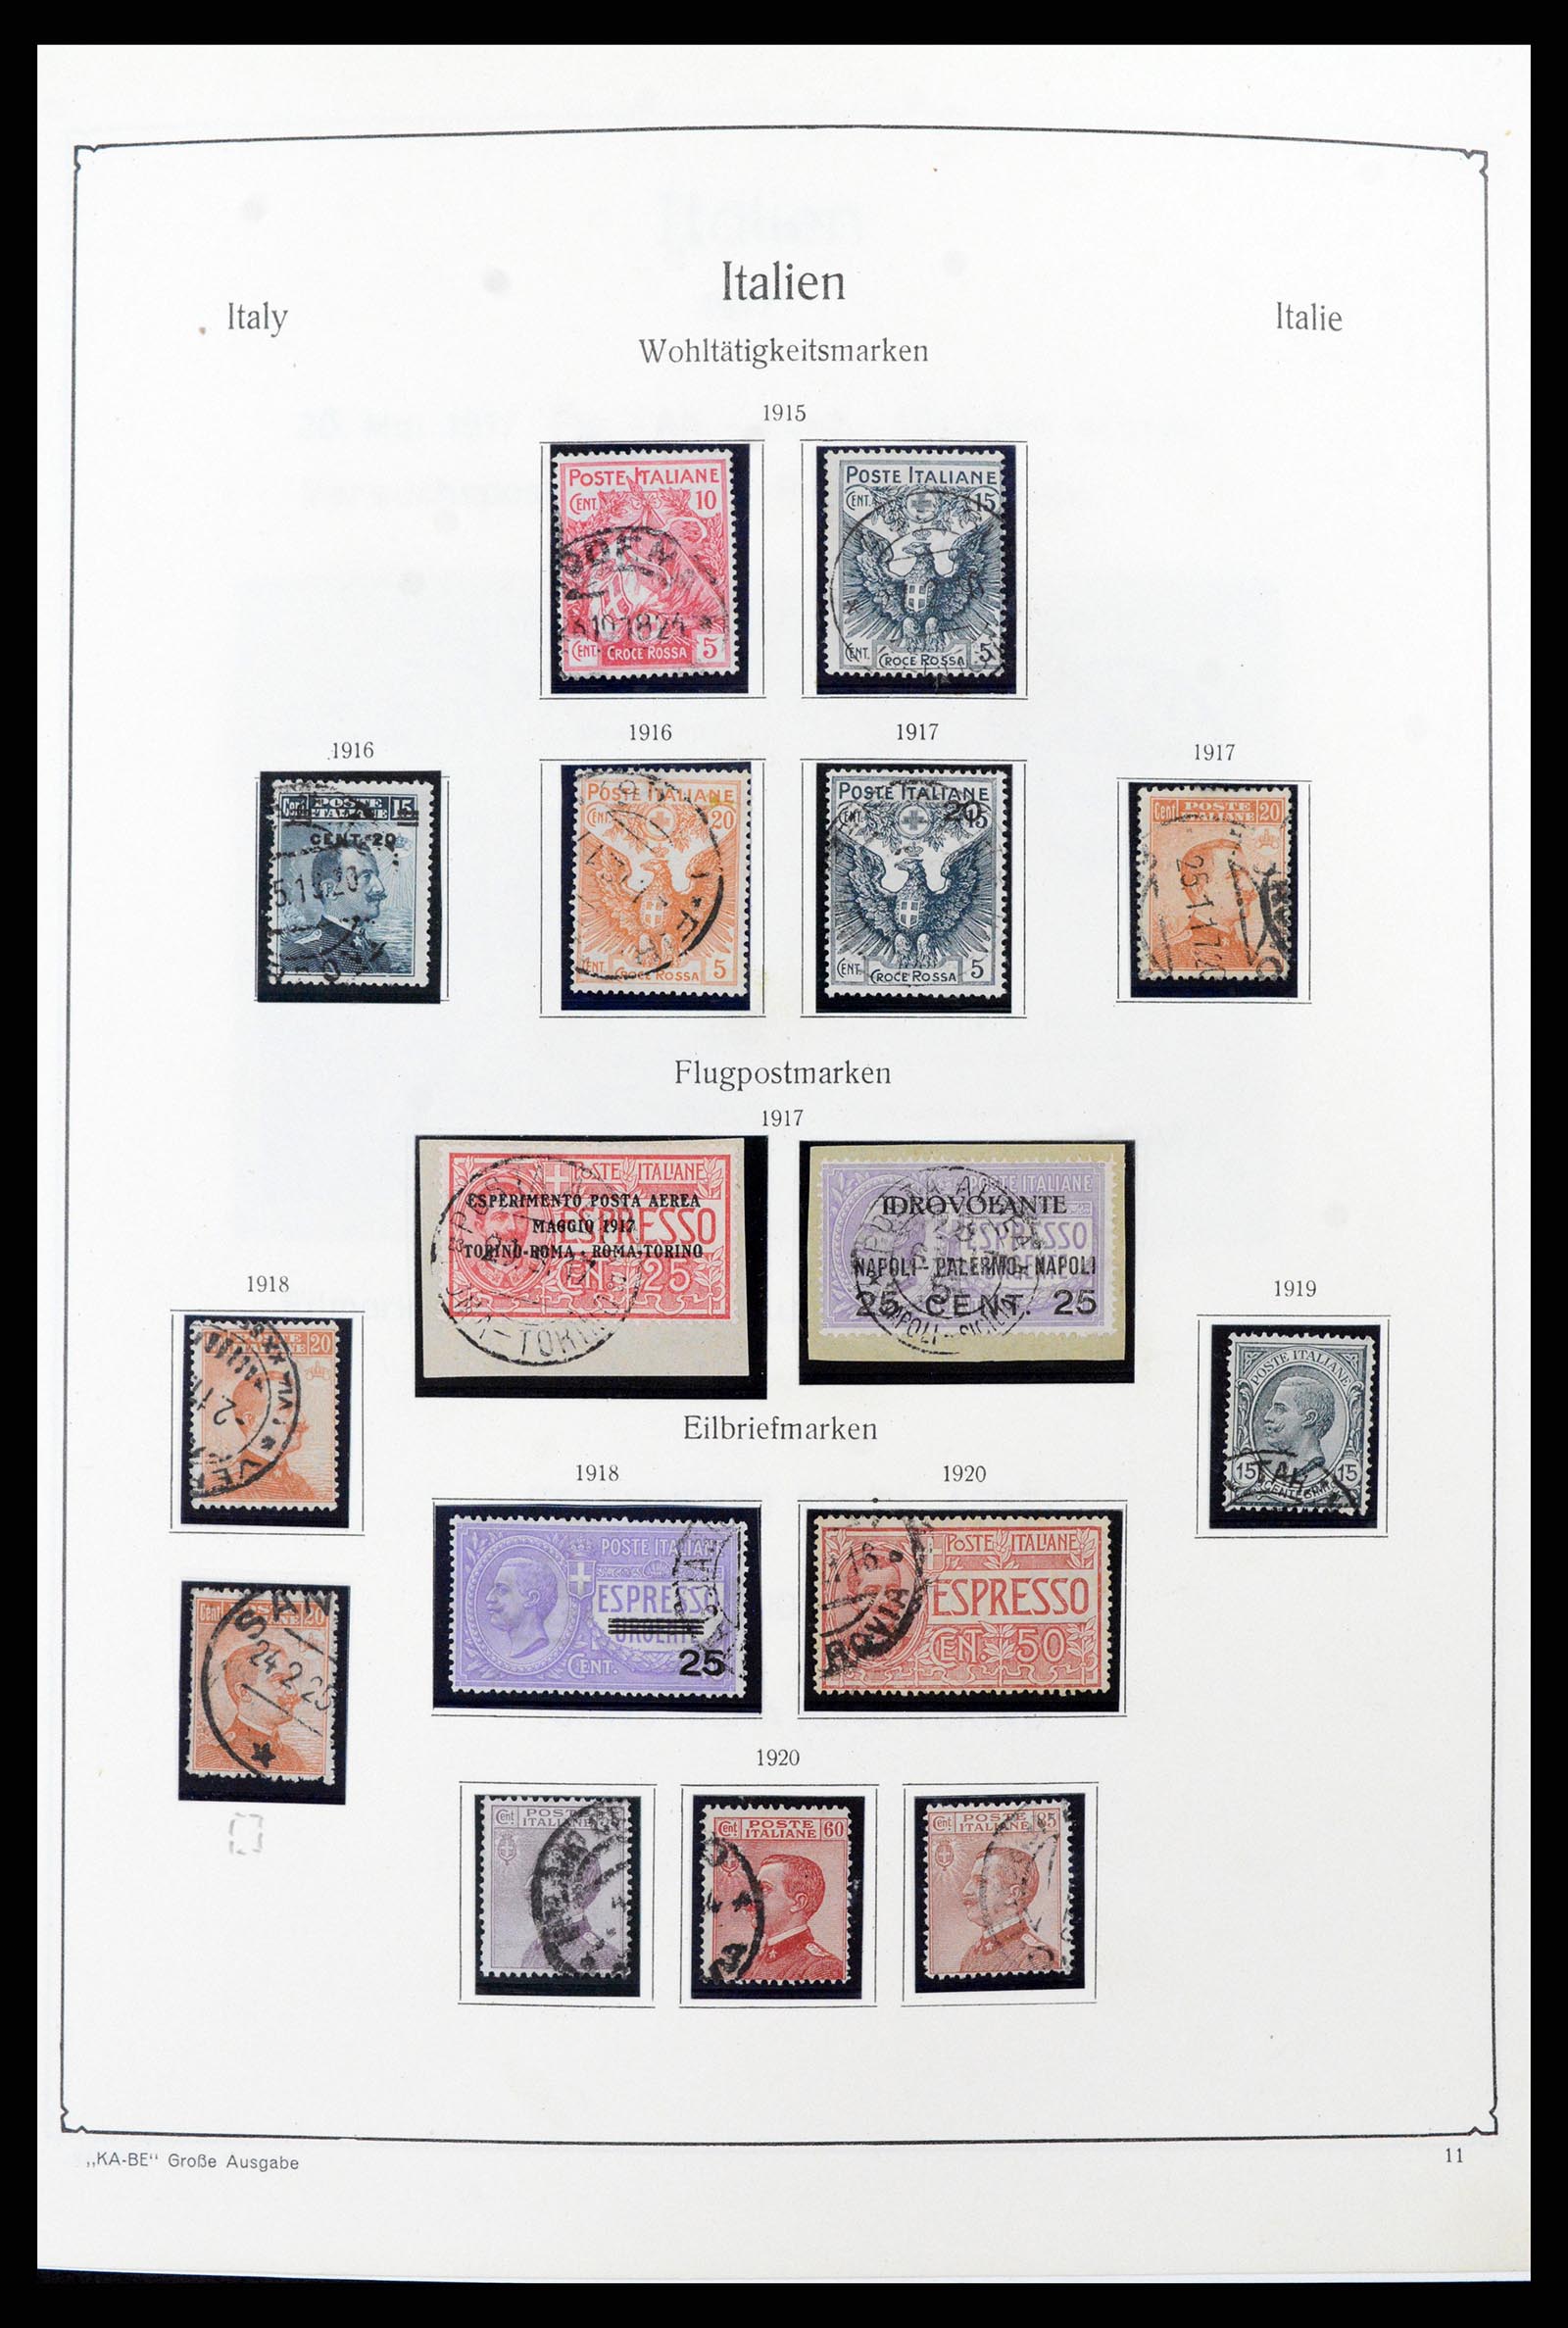 37605 024 - Stamp collection 37605 Italy and States 1855-1974.